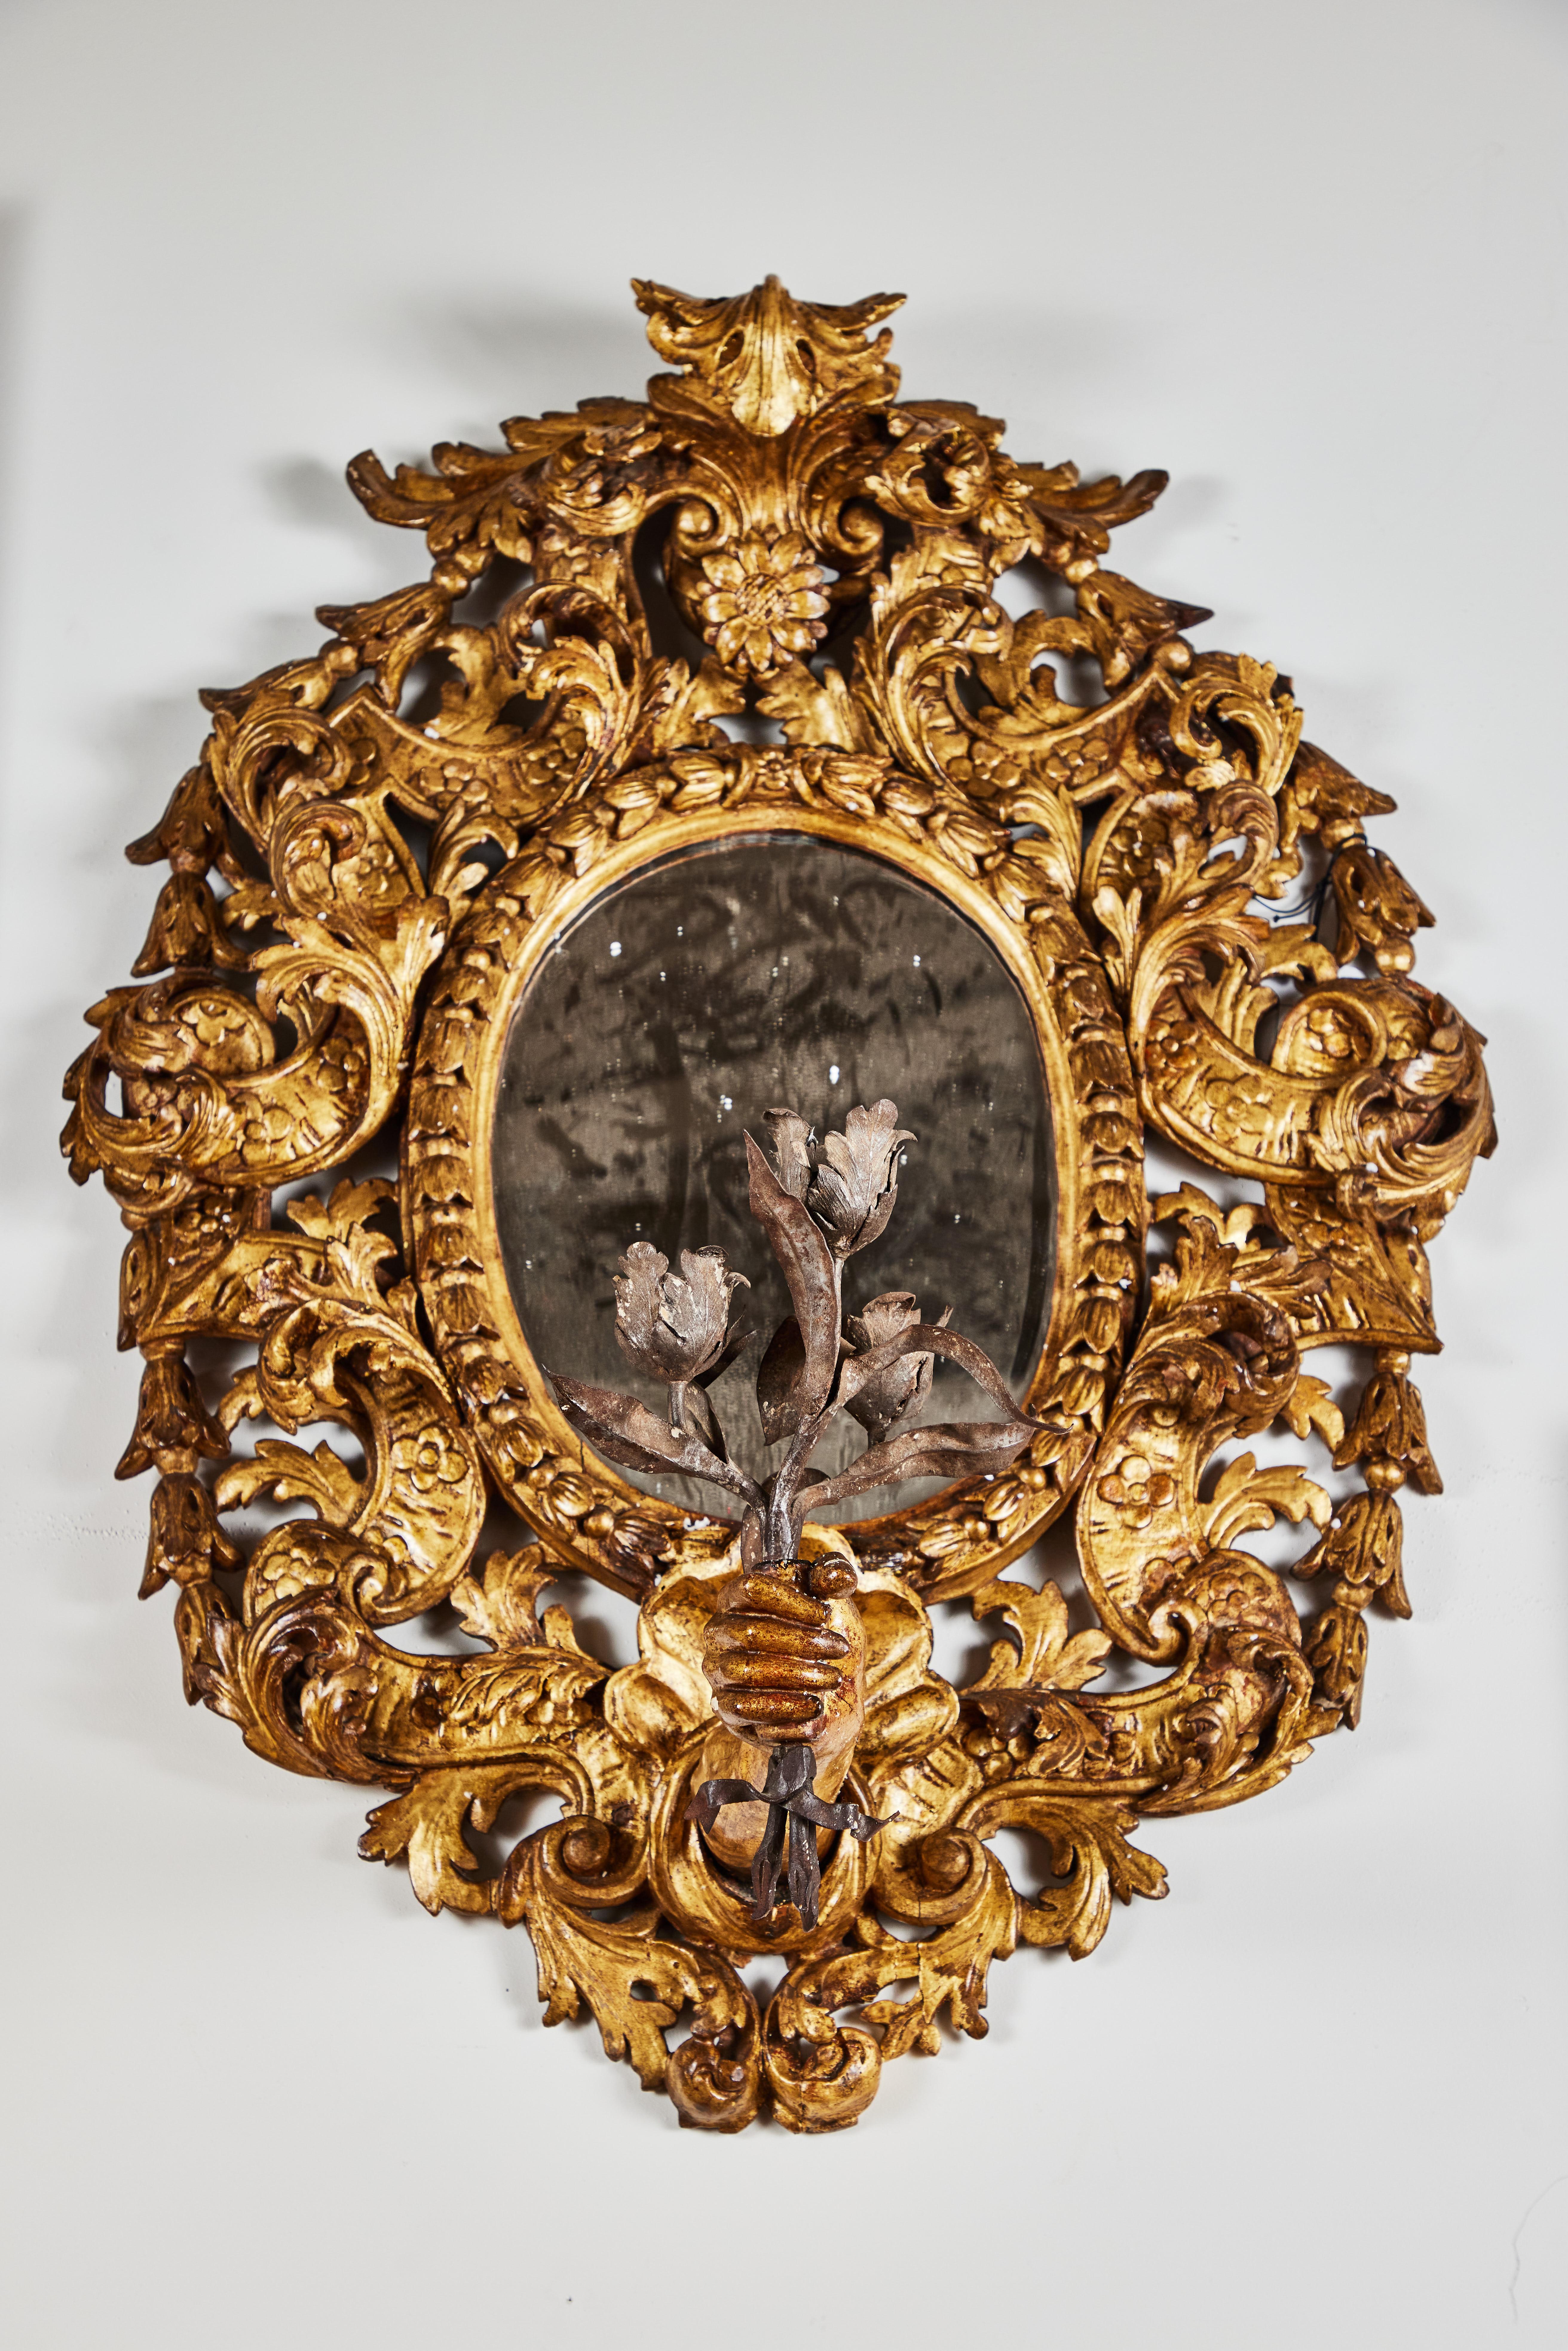 A rare and unusual pair of circa 1850, hand carved, gessoed, and 22-karat gold gilded pierced wood frames with an elaborate array of foliate scrolls surmounted by a curled acanthus leaf. The bottom of each featuring remarkable, thrusting forearms